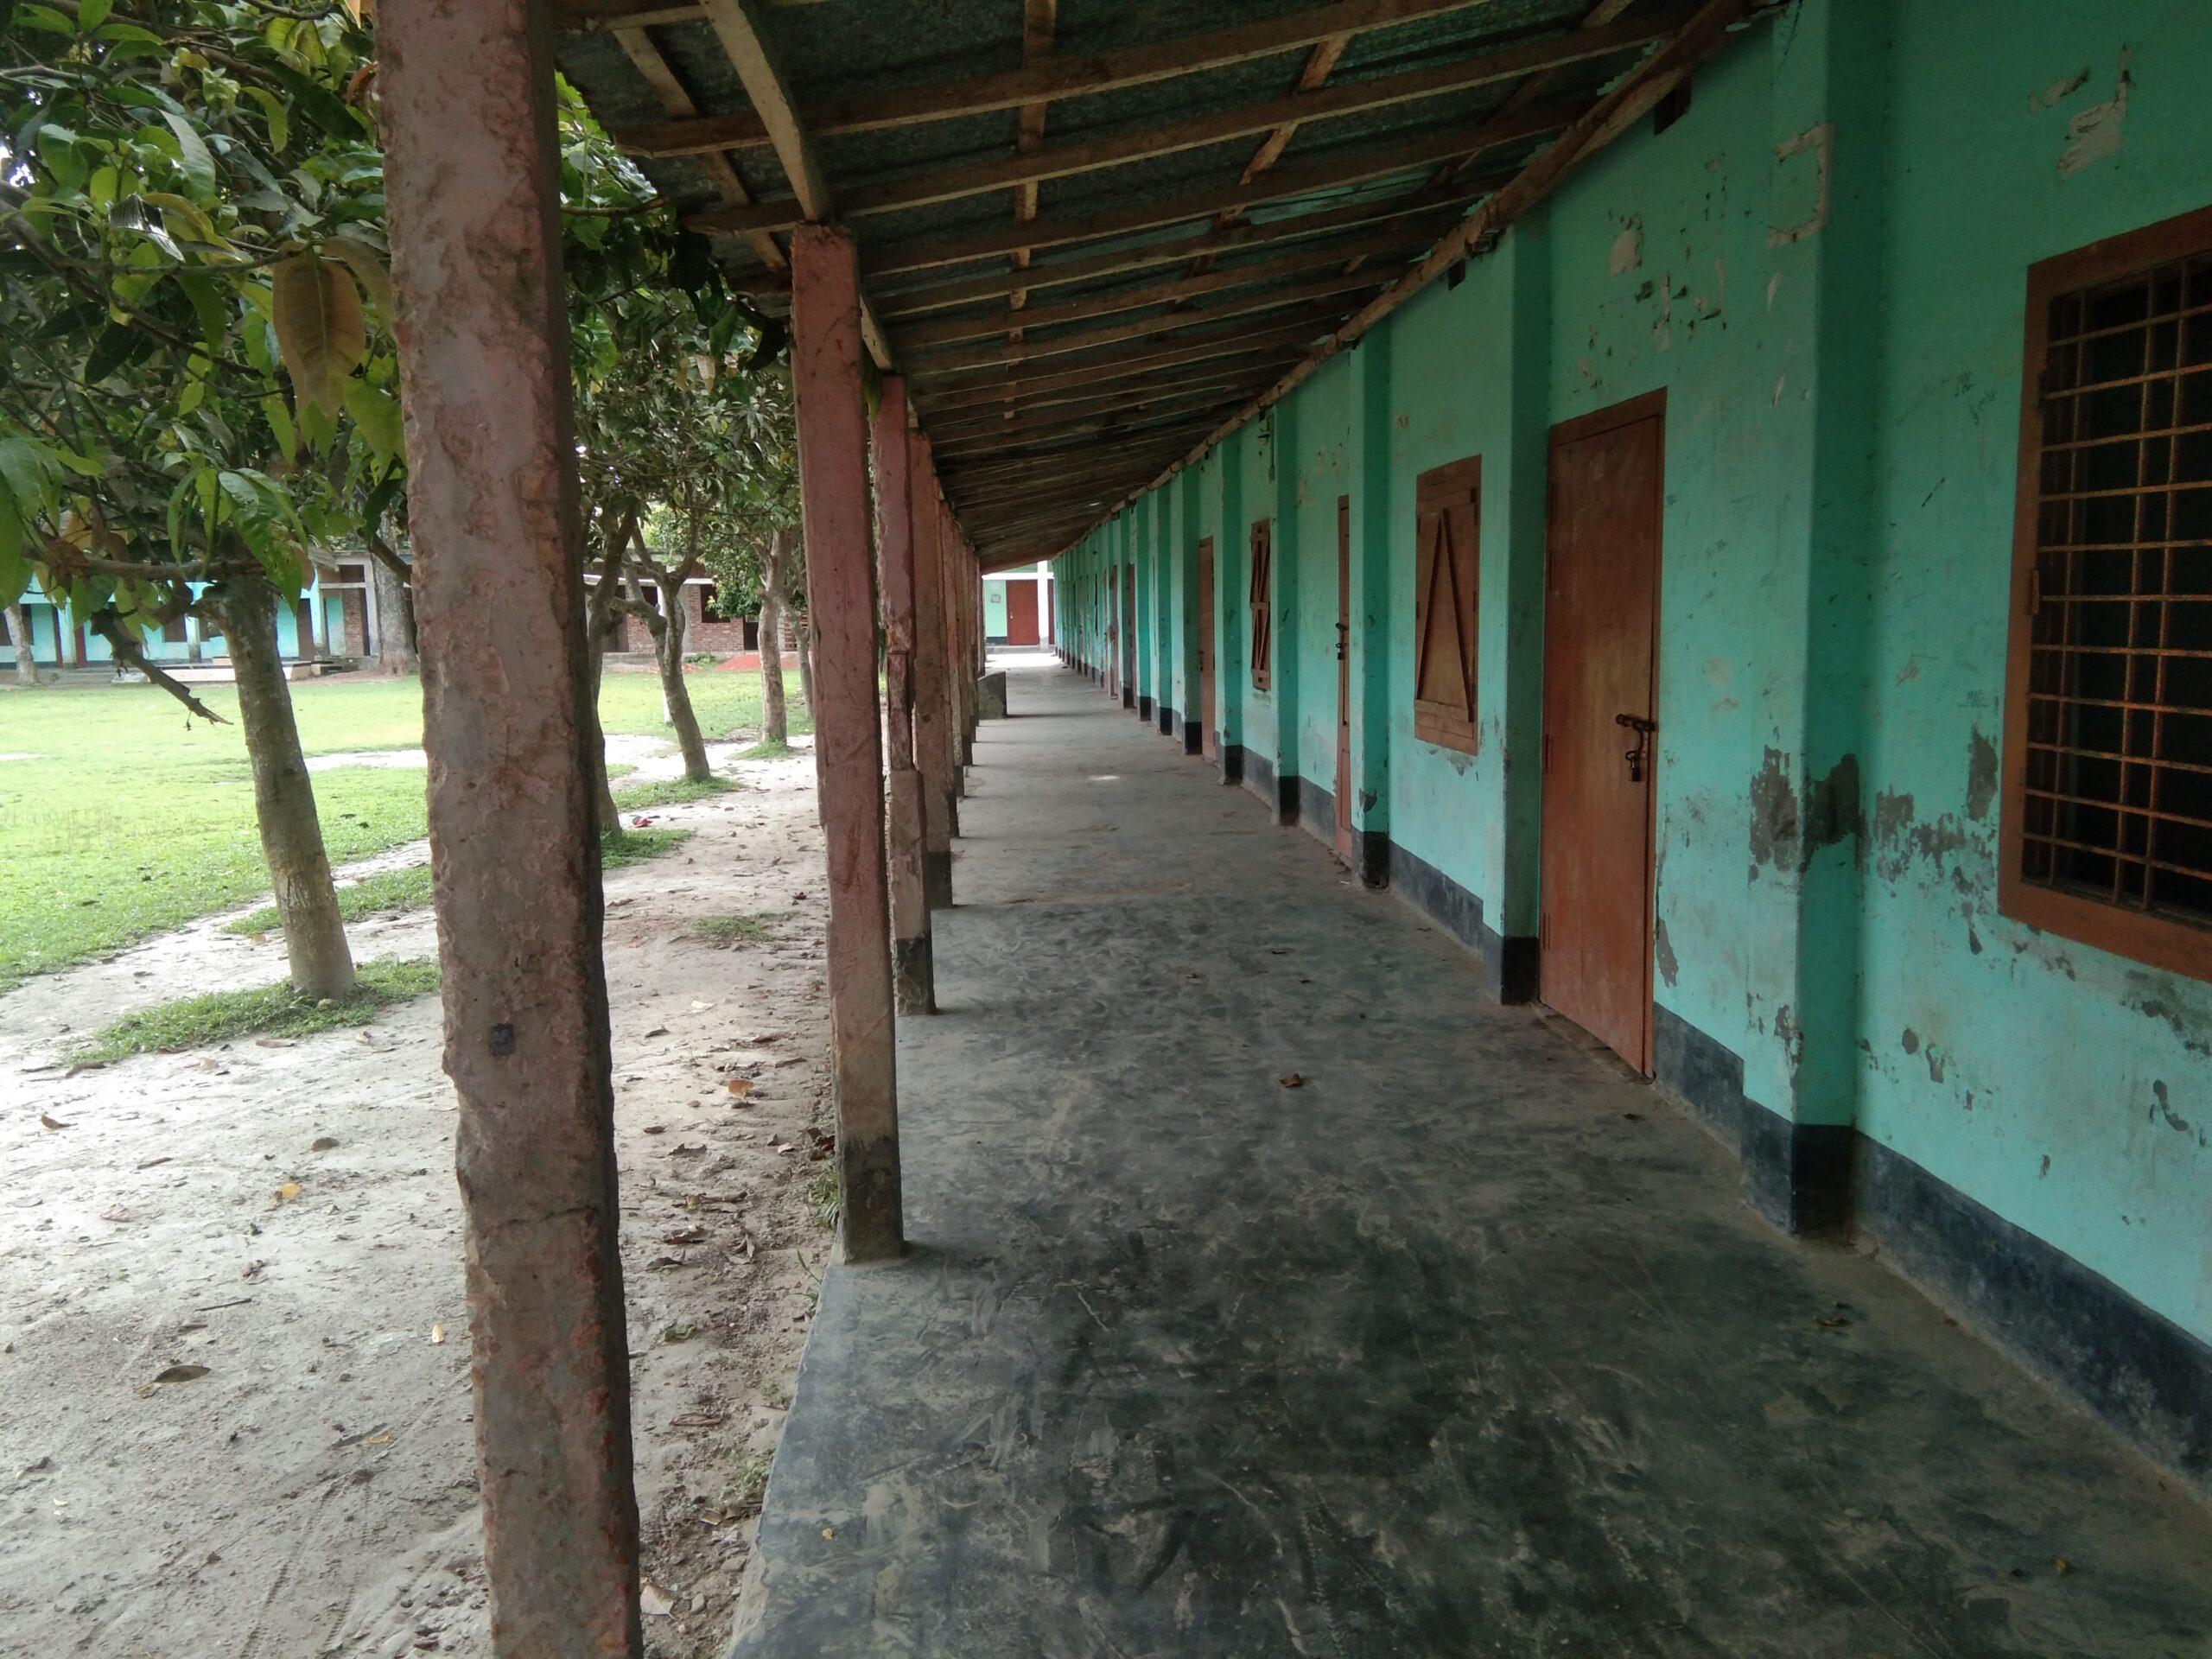 Class Room of the Baruahat High School